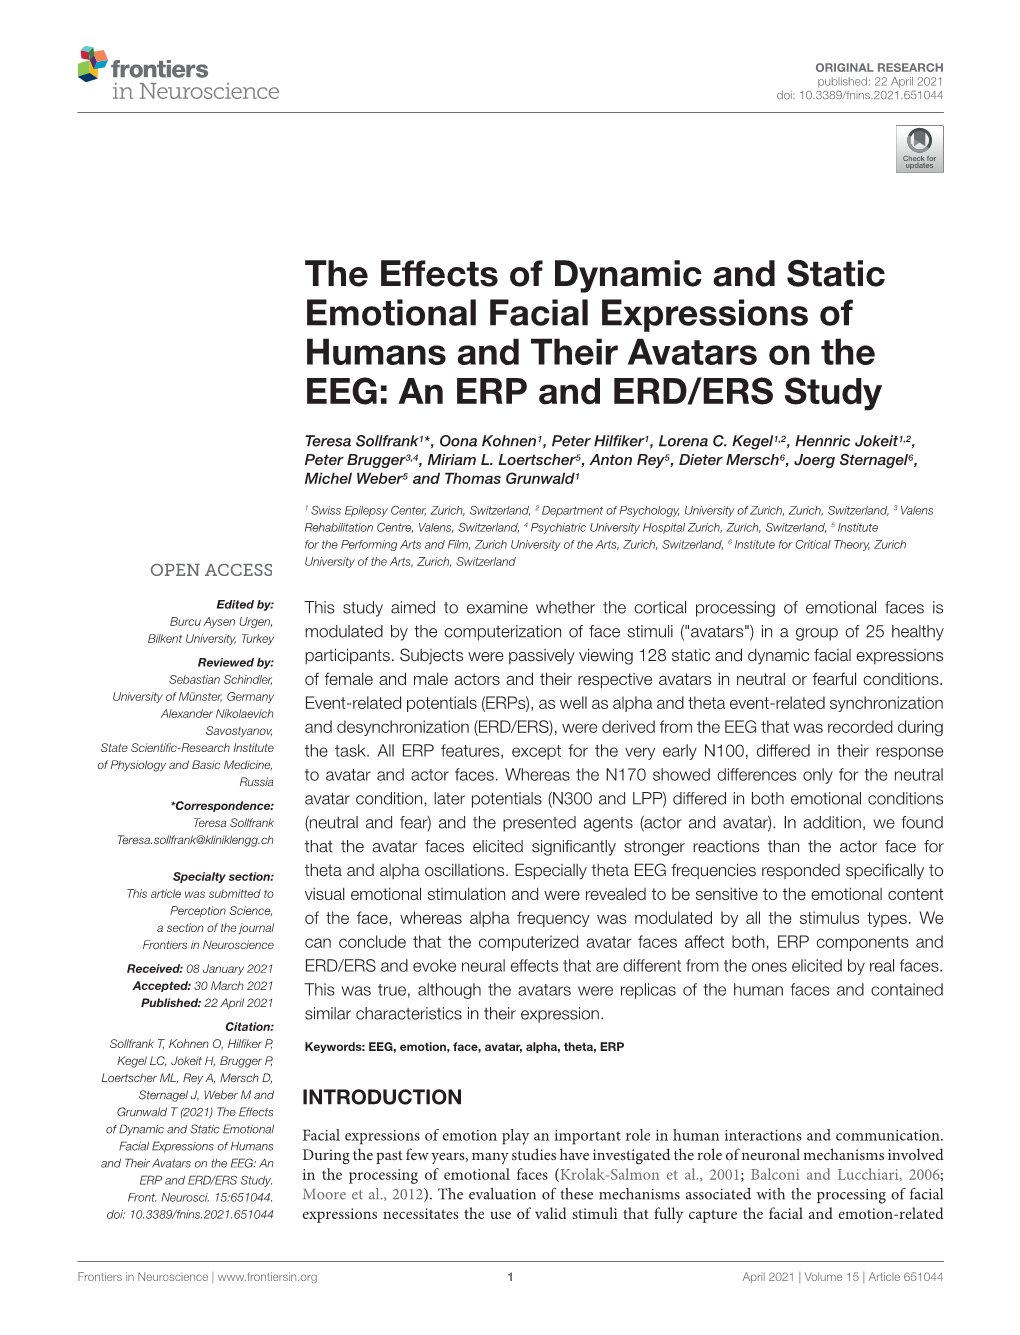 The Effects of Dynamic and Static Emotional Facial Expressions of Humans and Their Avatars on the EEG: an ERP and ERD/ERS Study